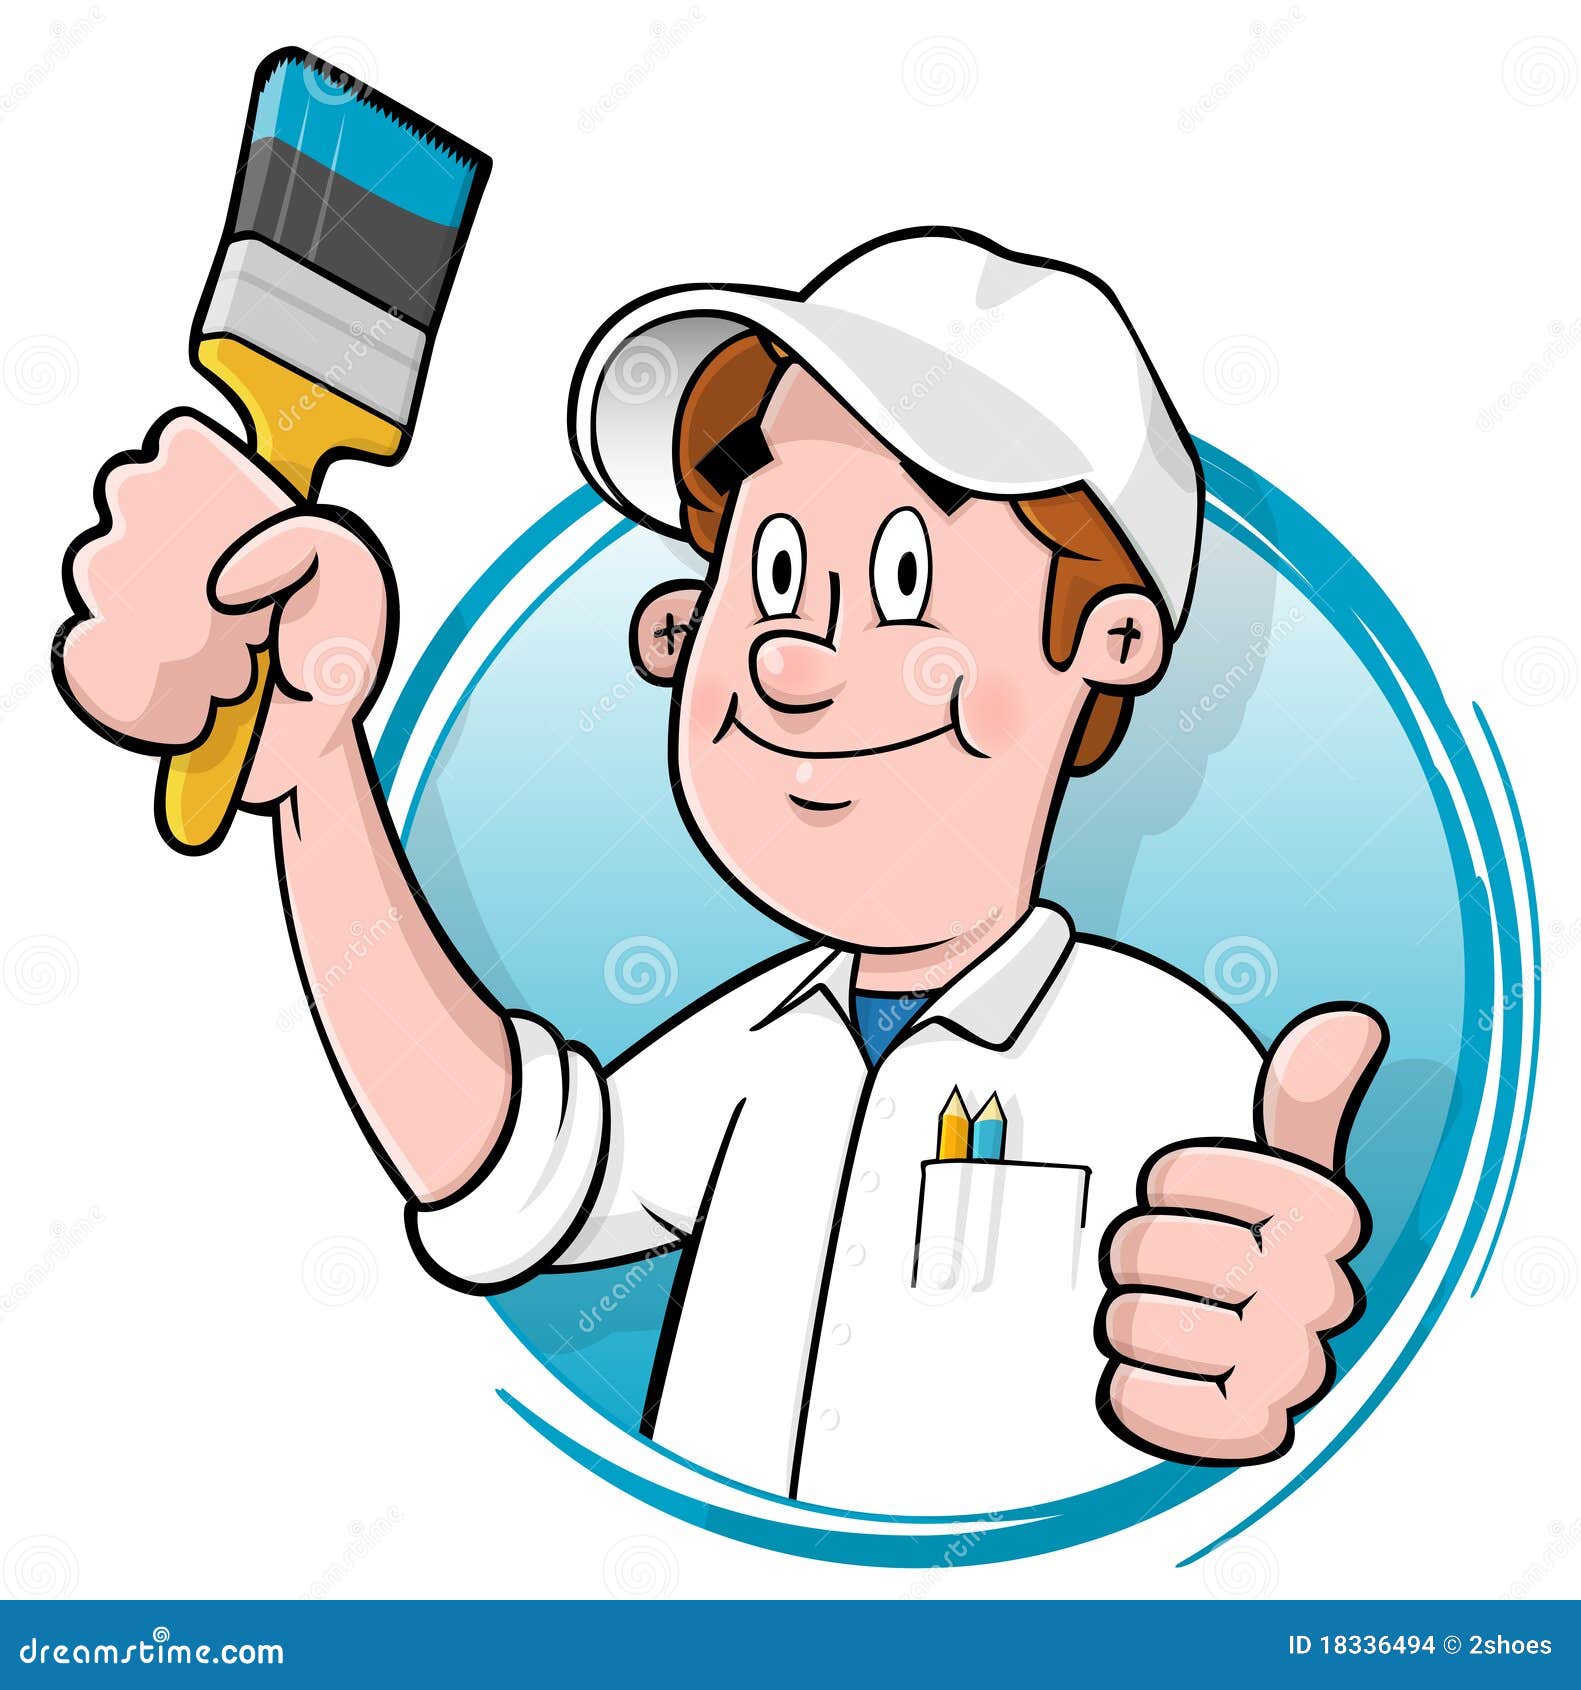 man painting house clipart - photo #10